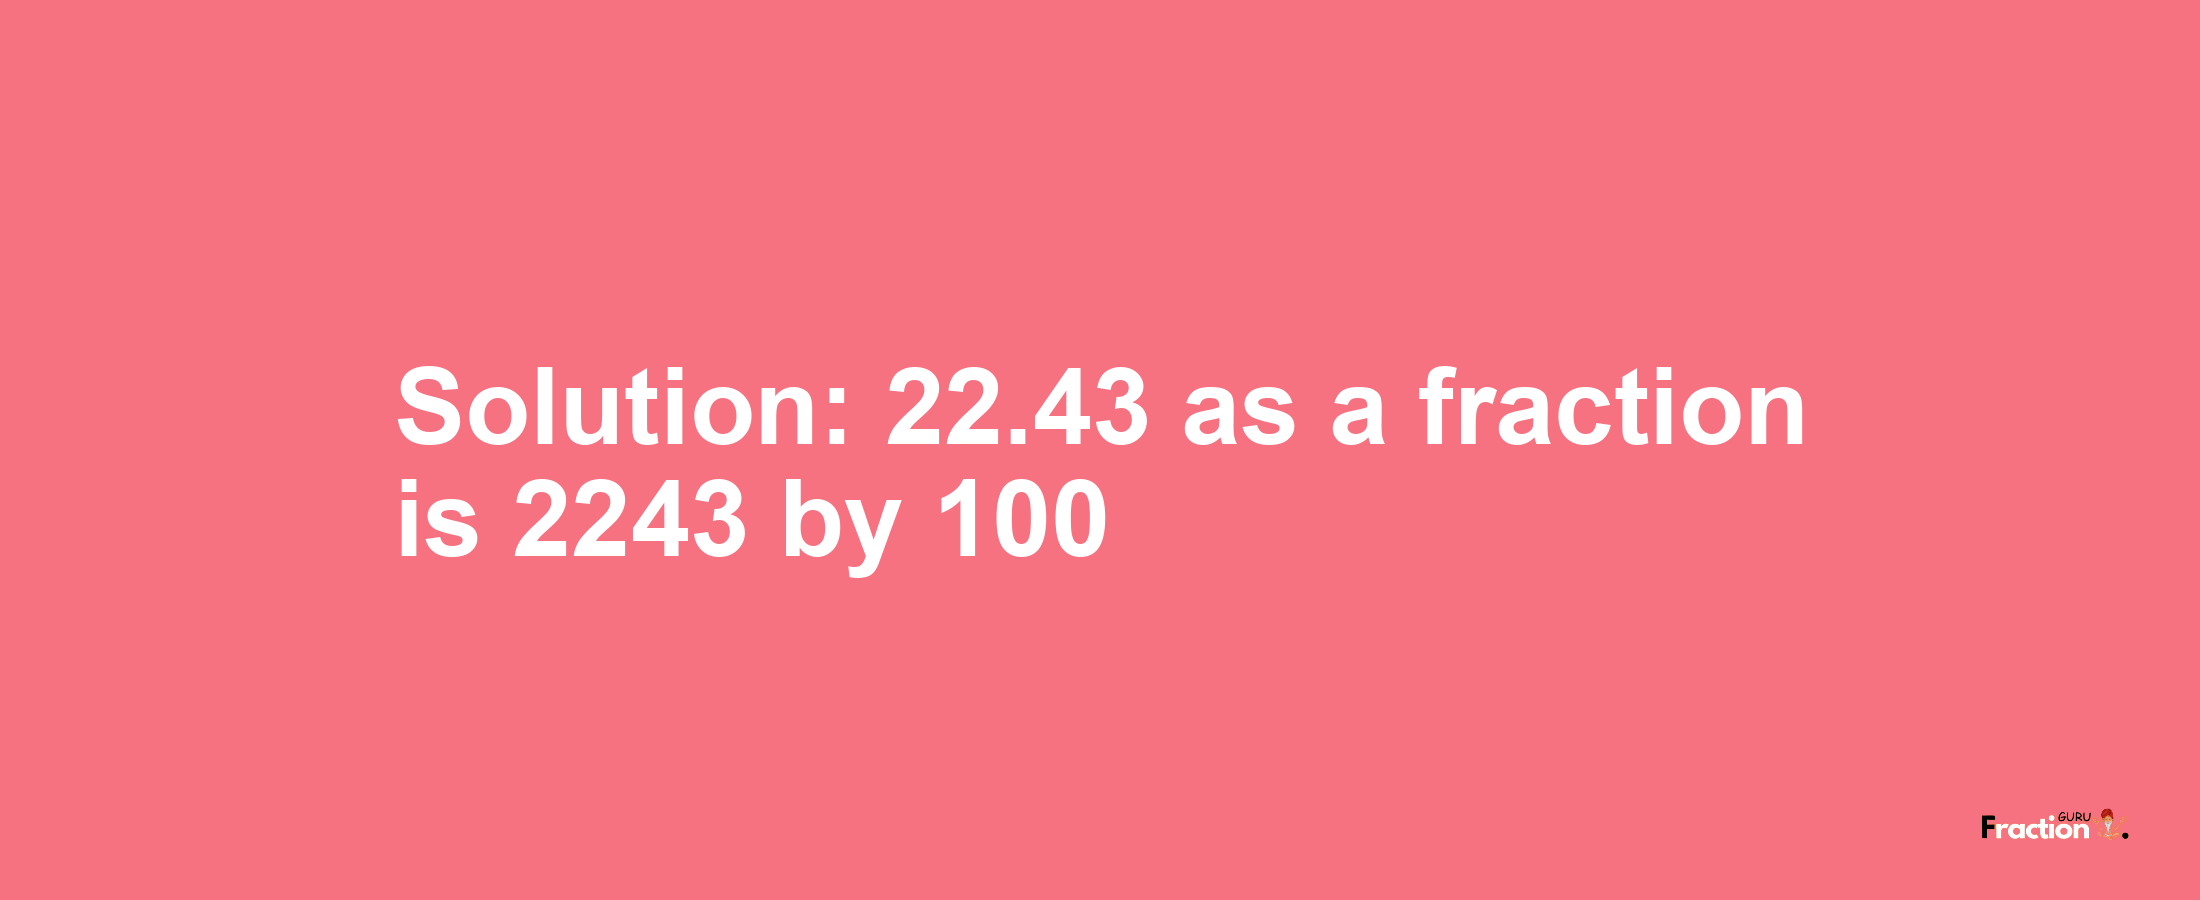 Solution:22.43 as a fraction is 2243/100